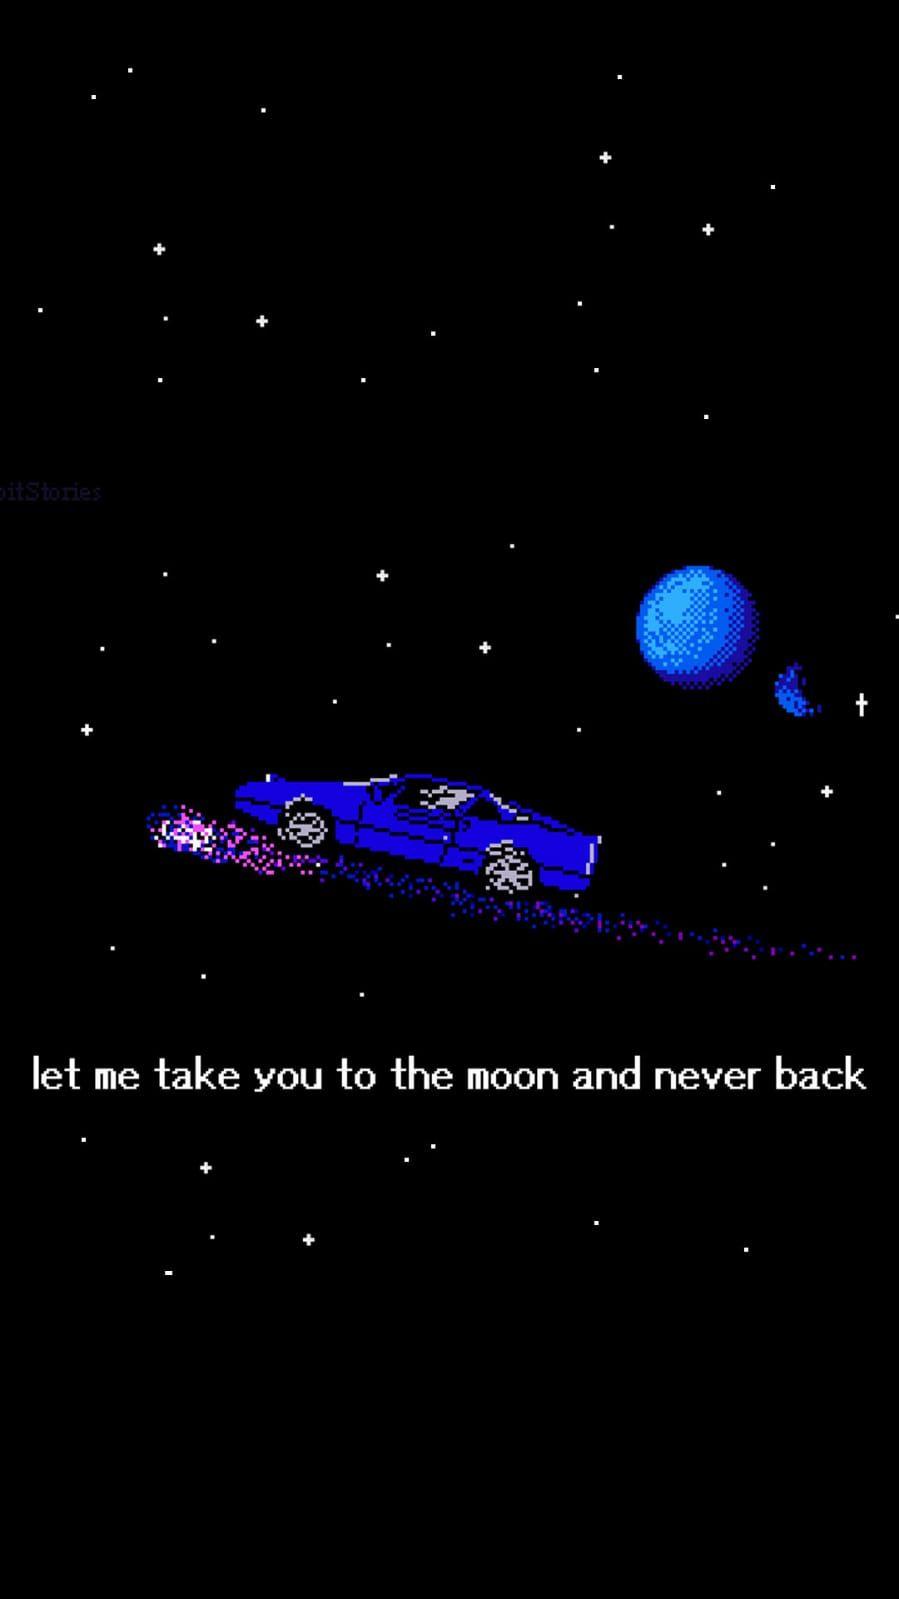 To the moon and. stay. Wallpaper. Aesthetic